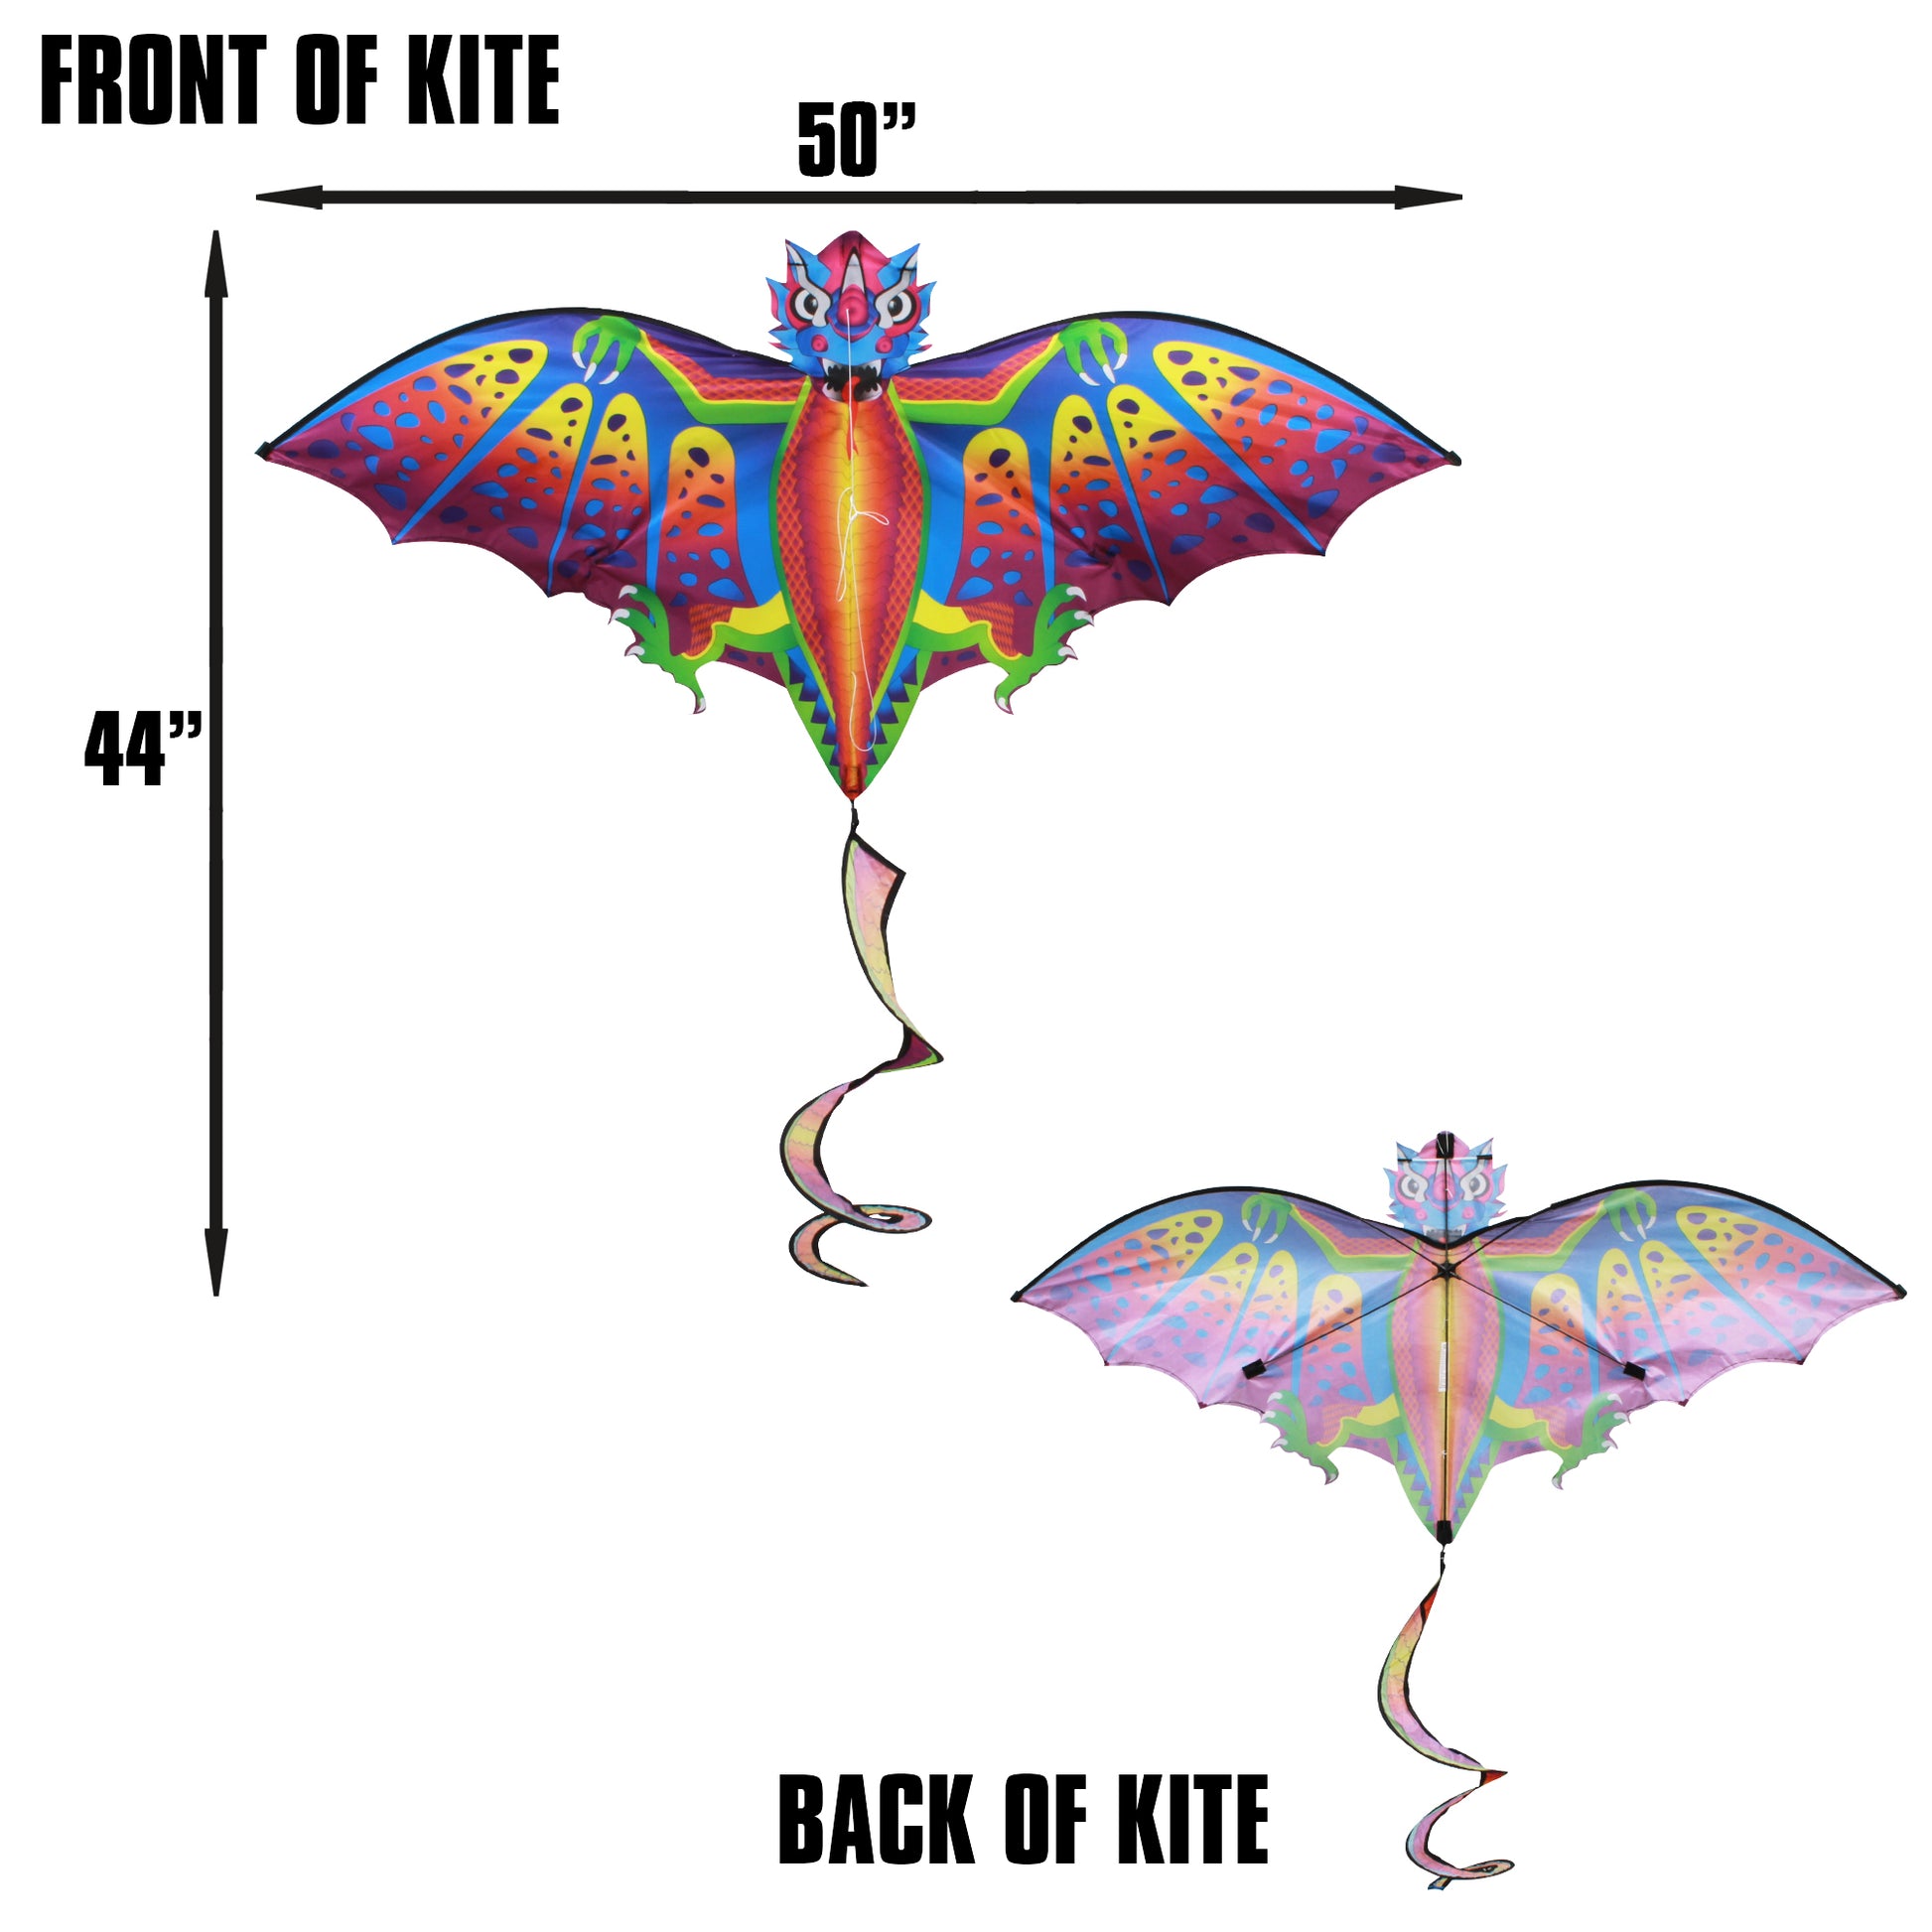 X Kites StratoKite Dragon Nylon Figure Kite Product Dimensions 50 inches wide by 44 inches tall